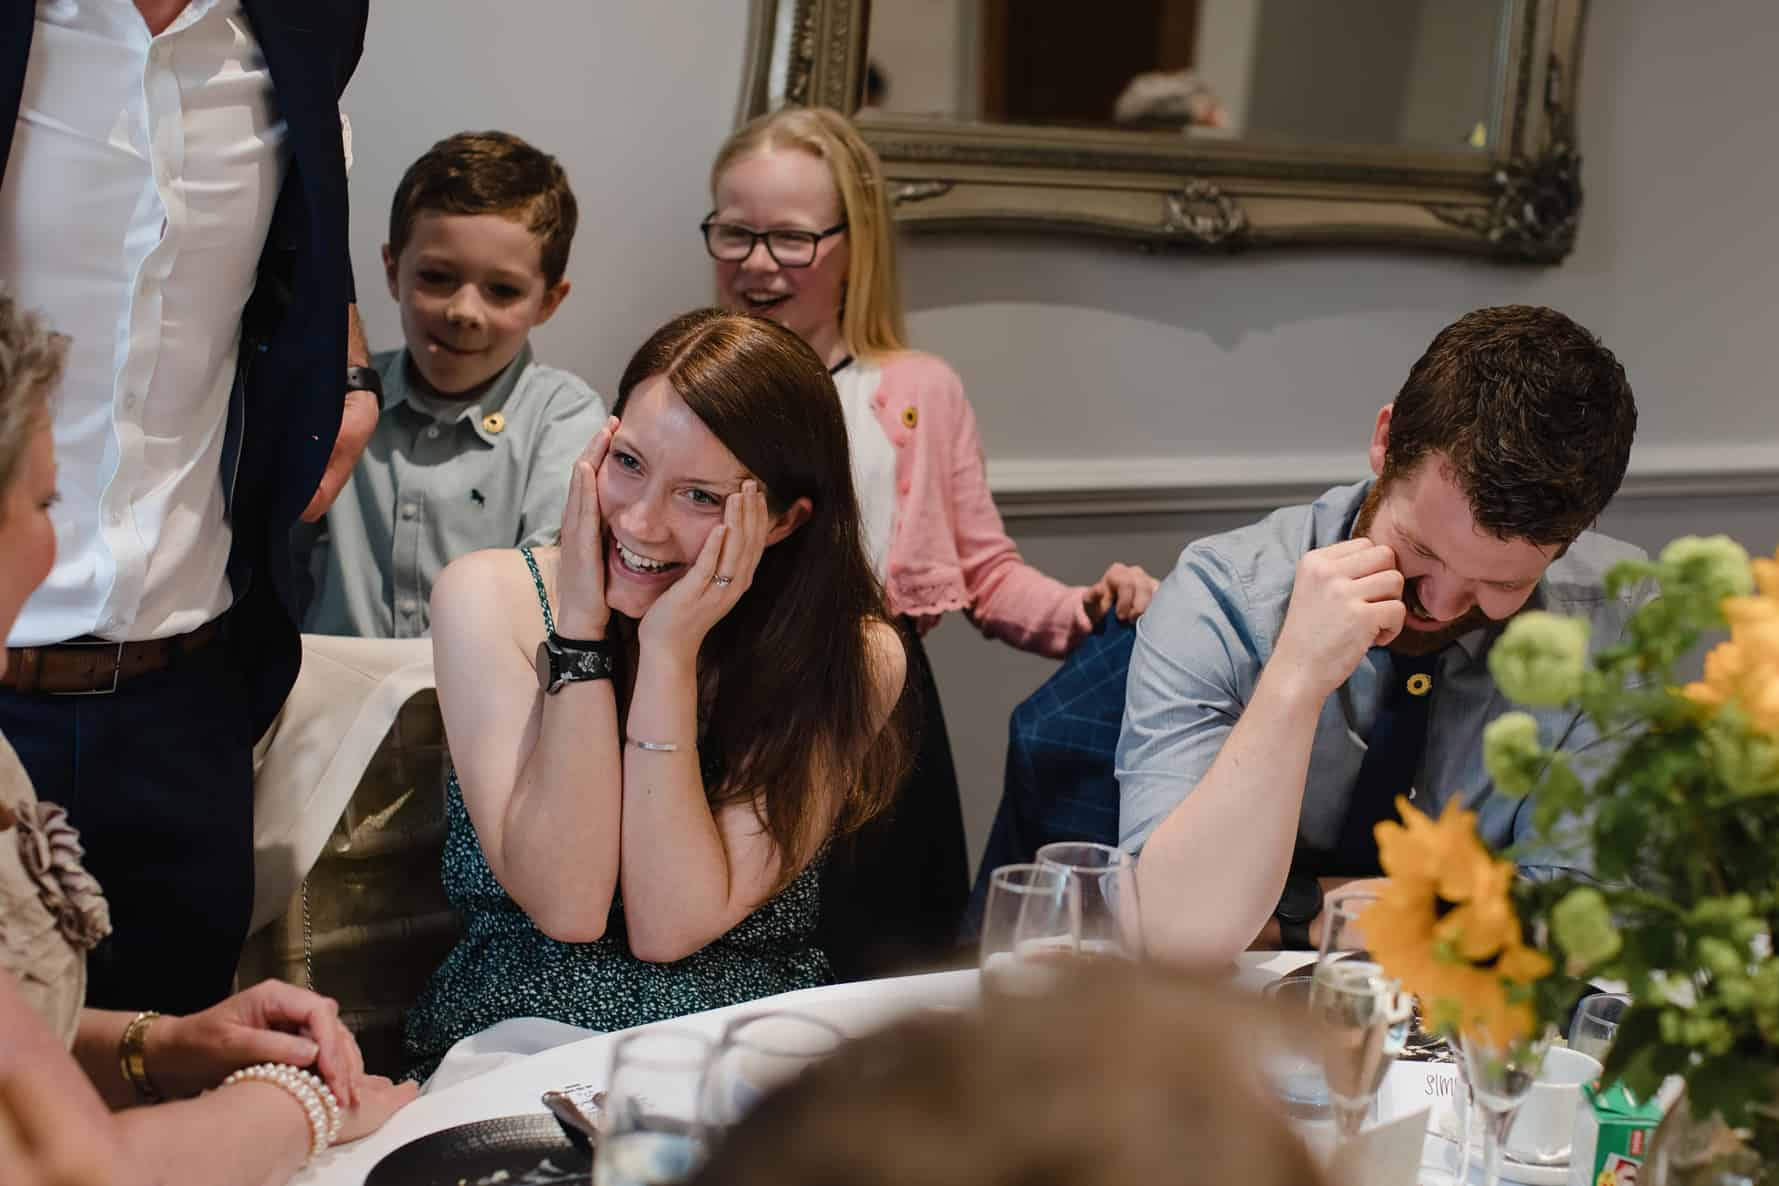 Wedding Magician James Maidment, leaves guests in disbelief after incredible magic trick at Balmer Lawn New Forest